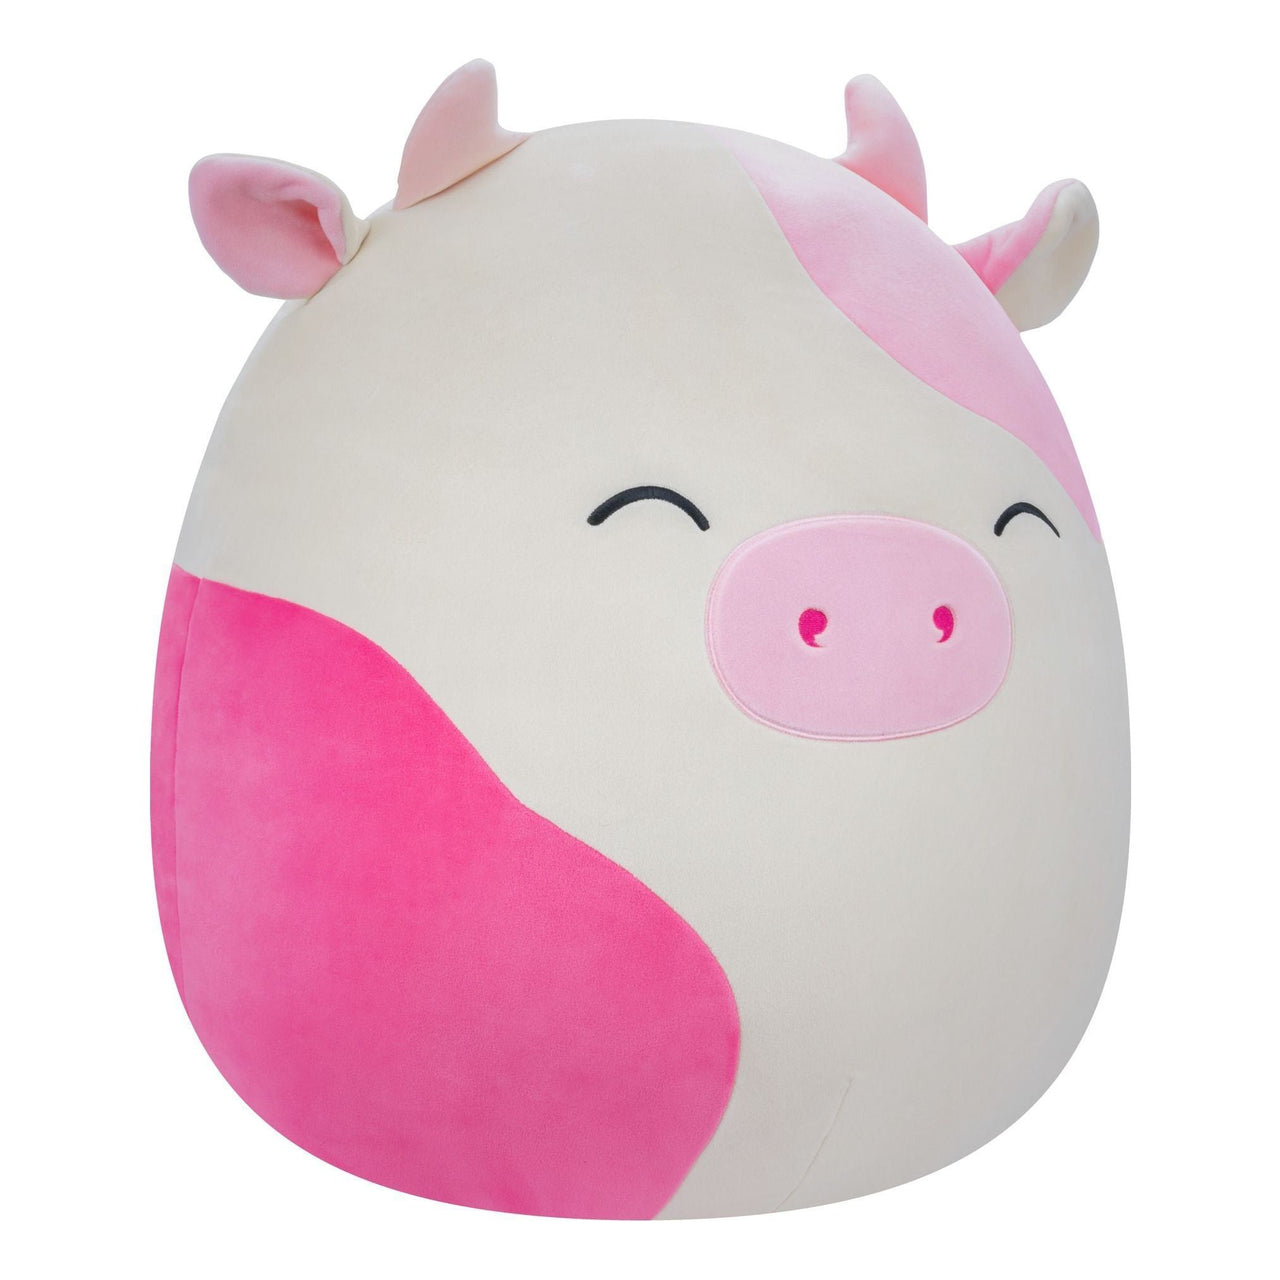 Squishmallows 16" Caedyn the Pink Spotted Cow Plush Squishmallows